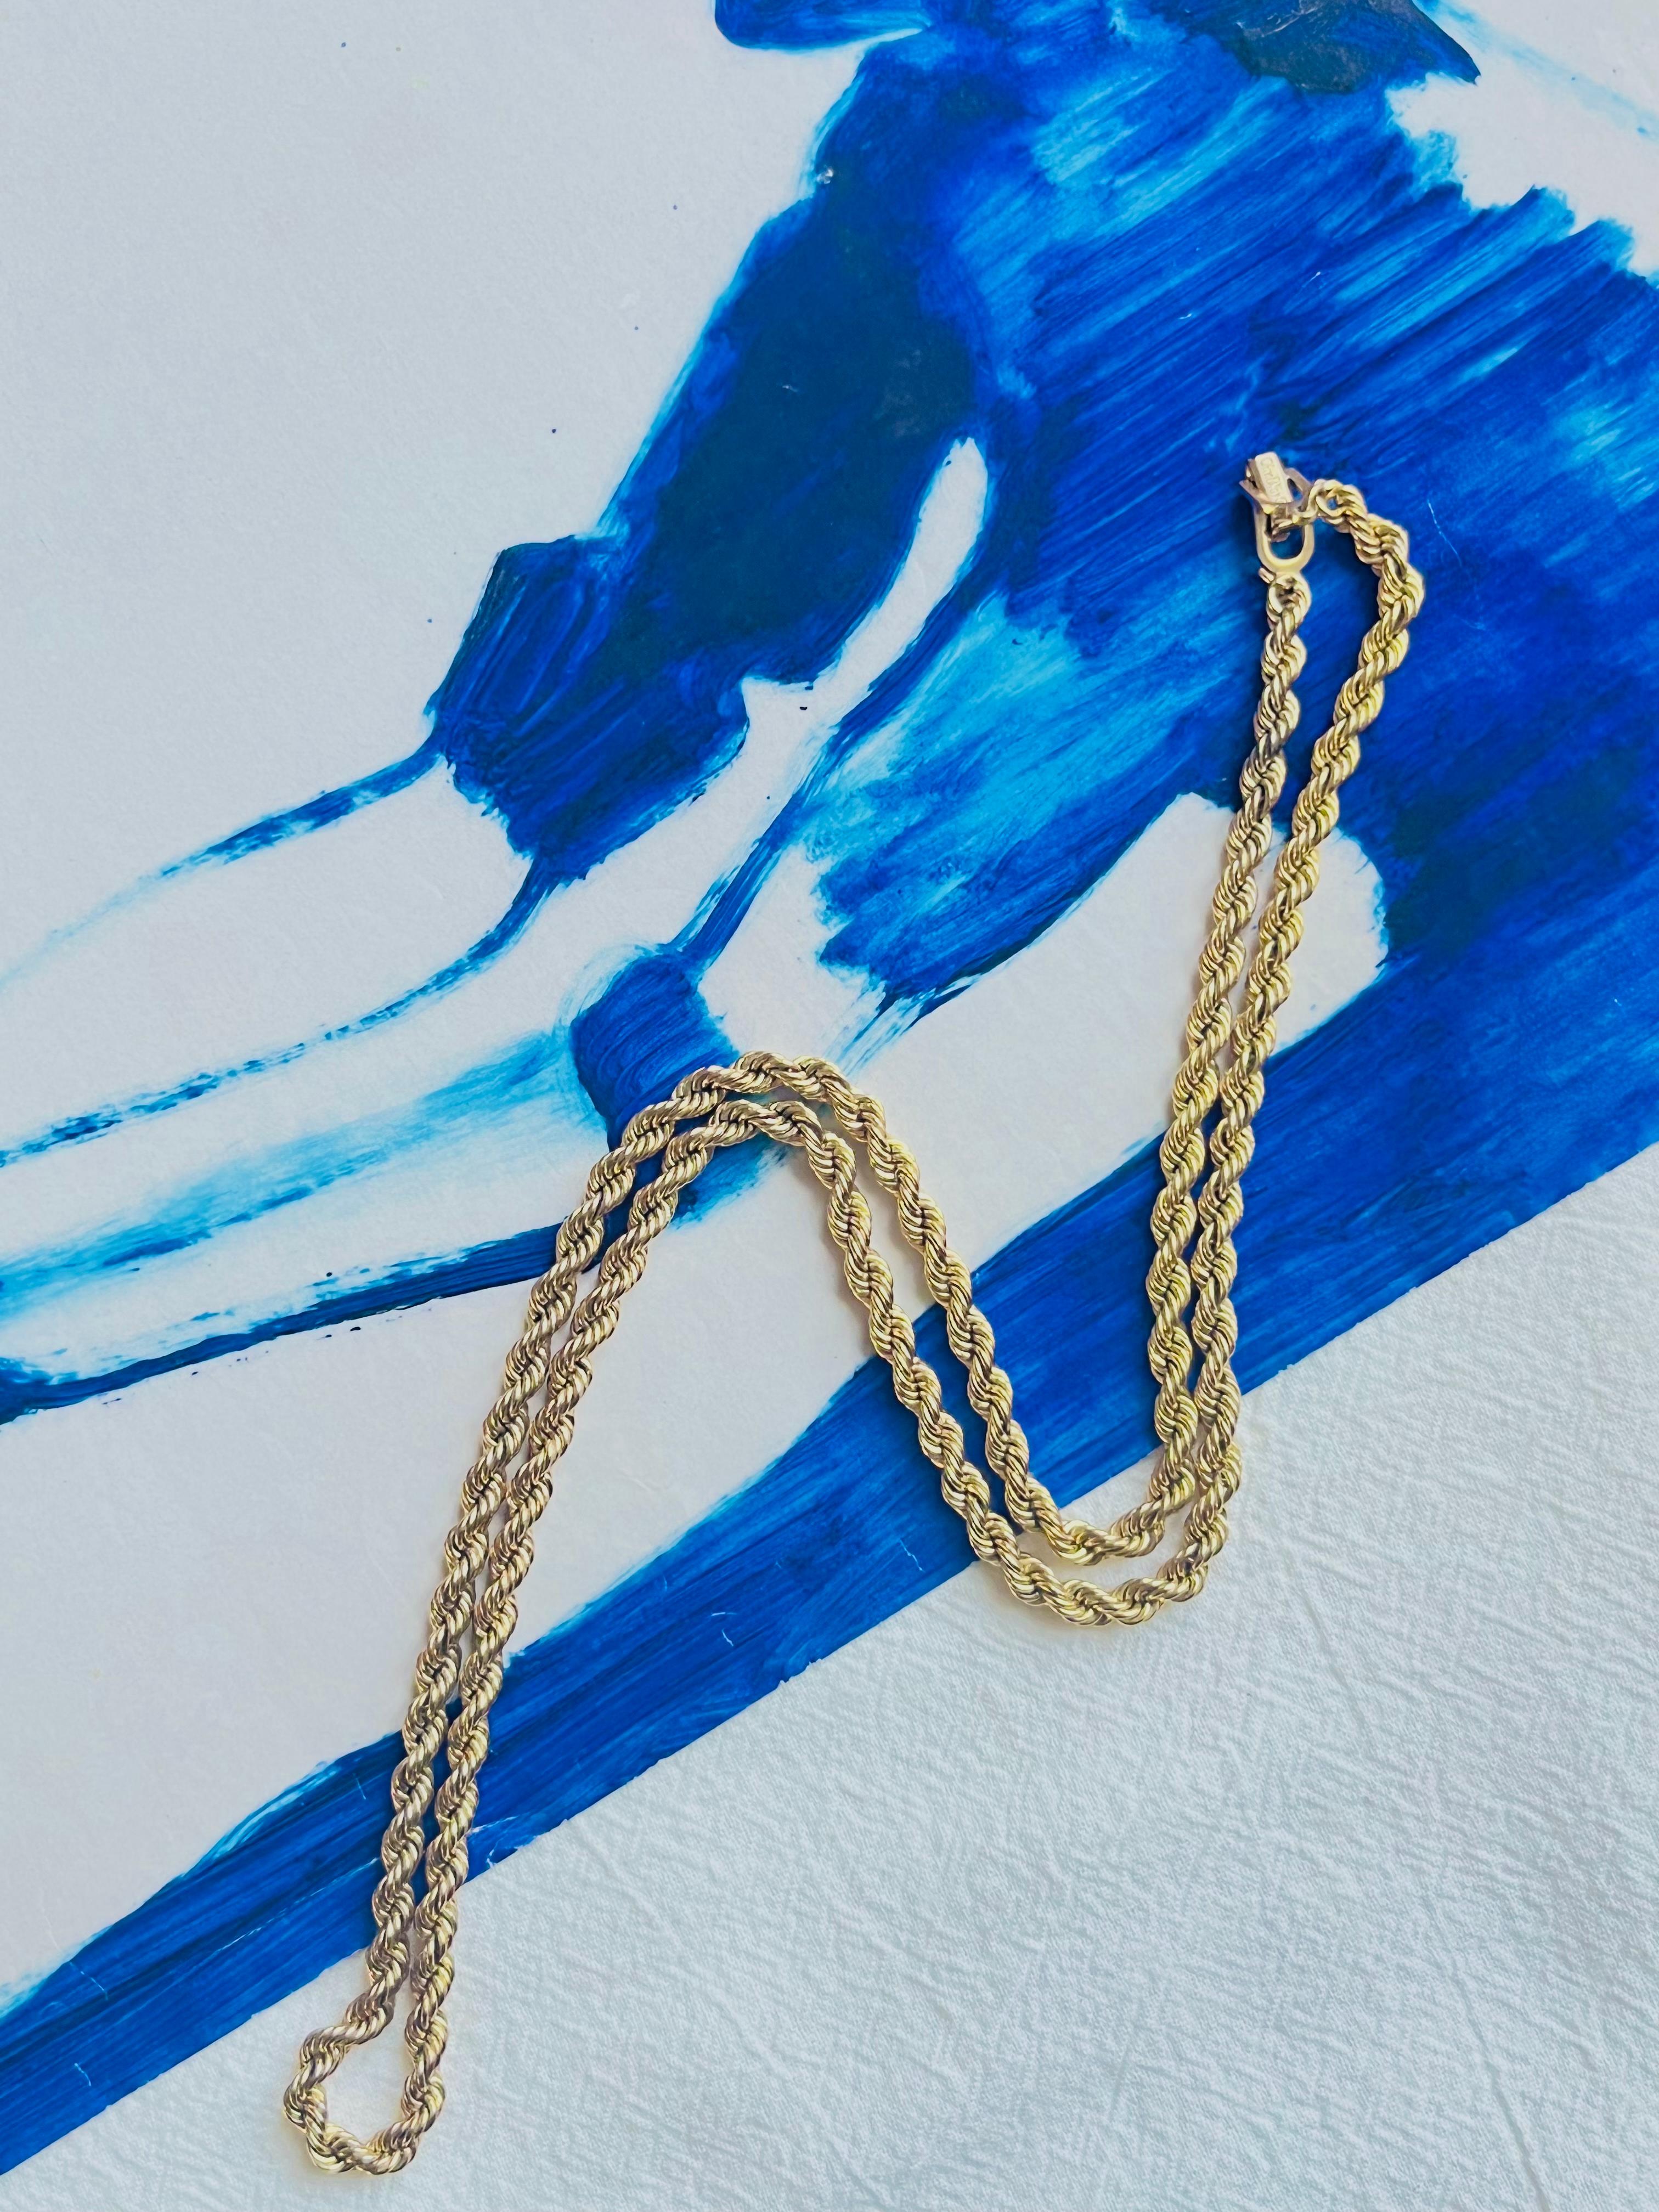 Christian Dior Vintage 1980s Twist Chain Rope Versatile Long Necklace Bracelet In Excellent Condition For Sale In Wokingham, England